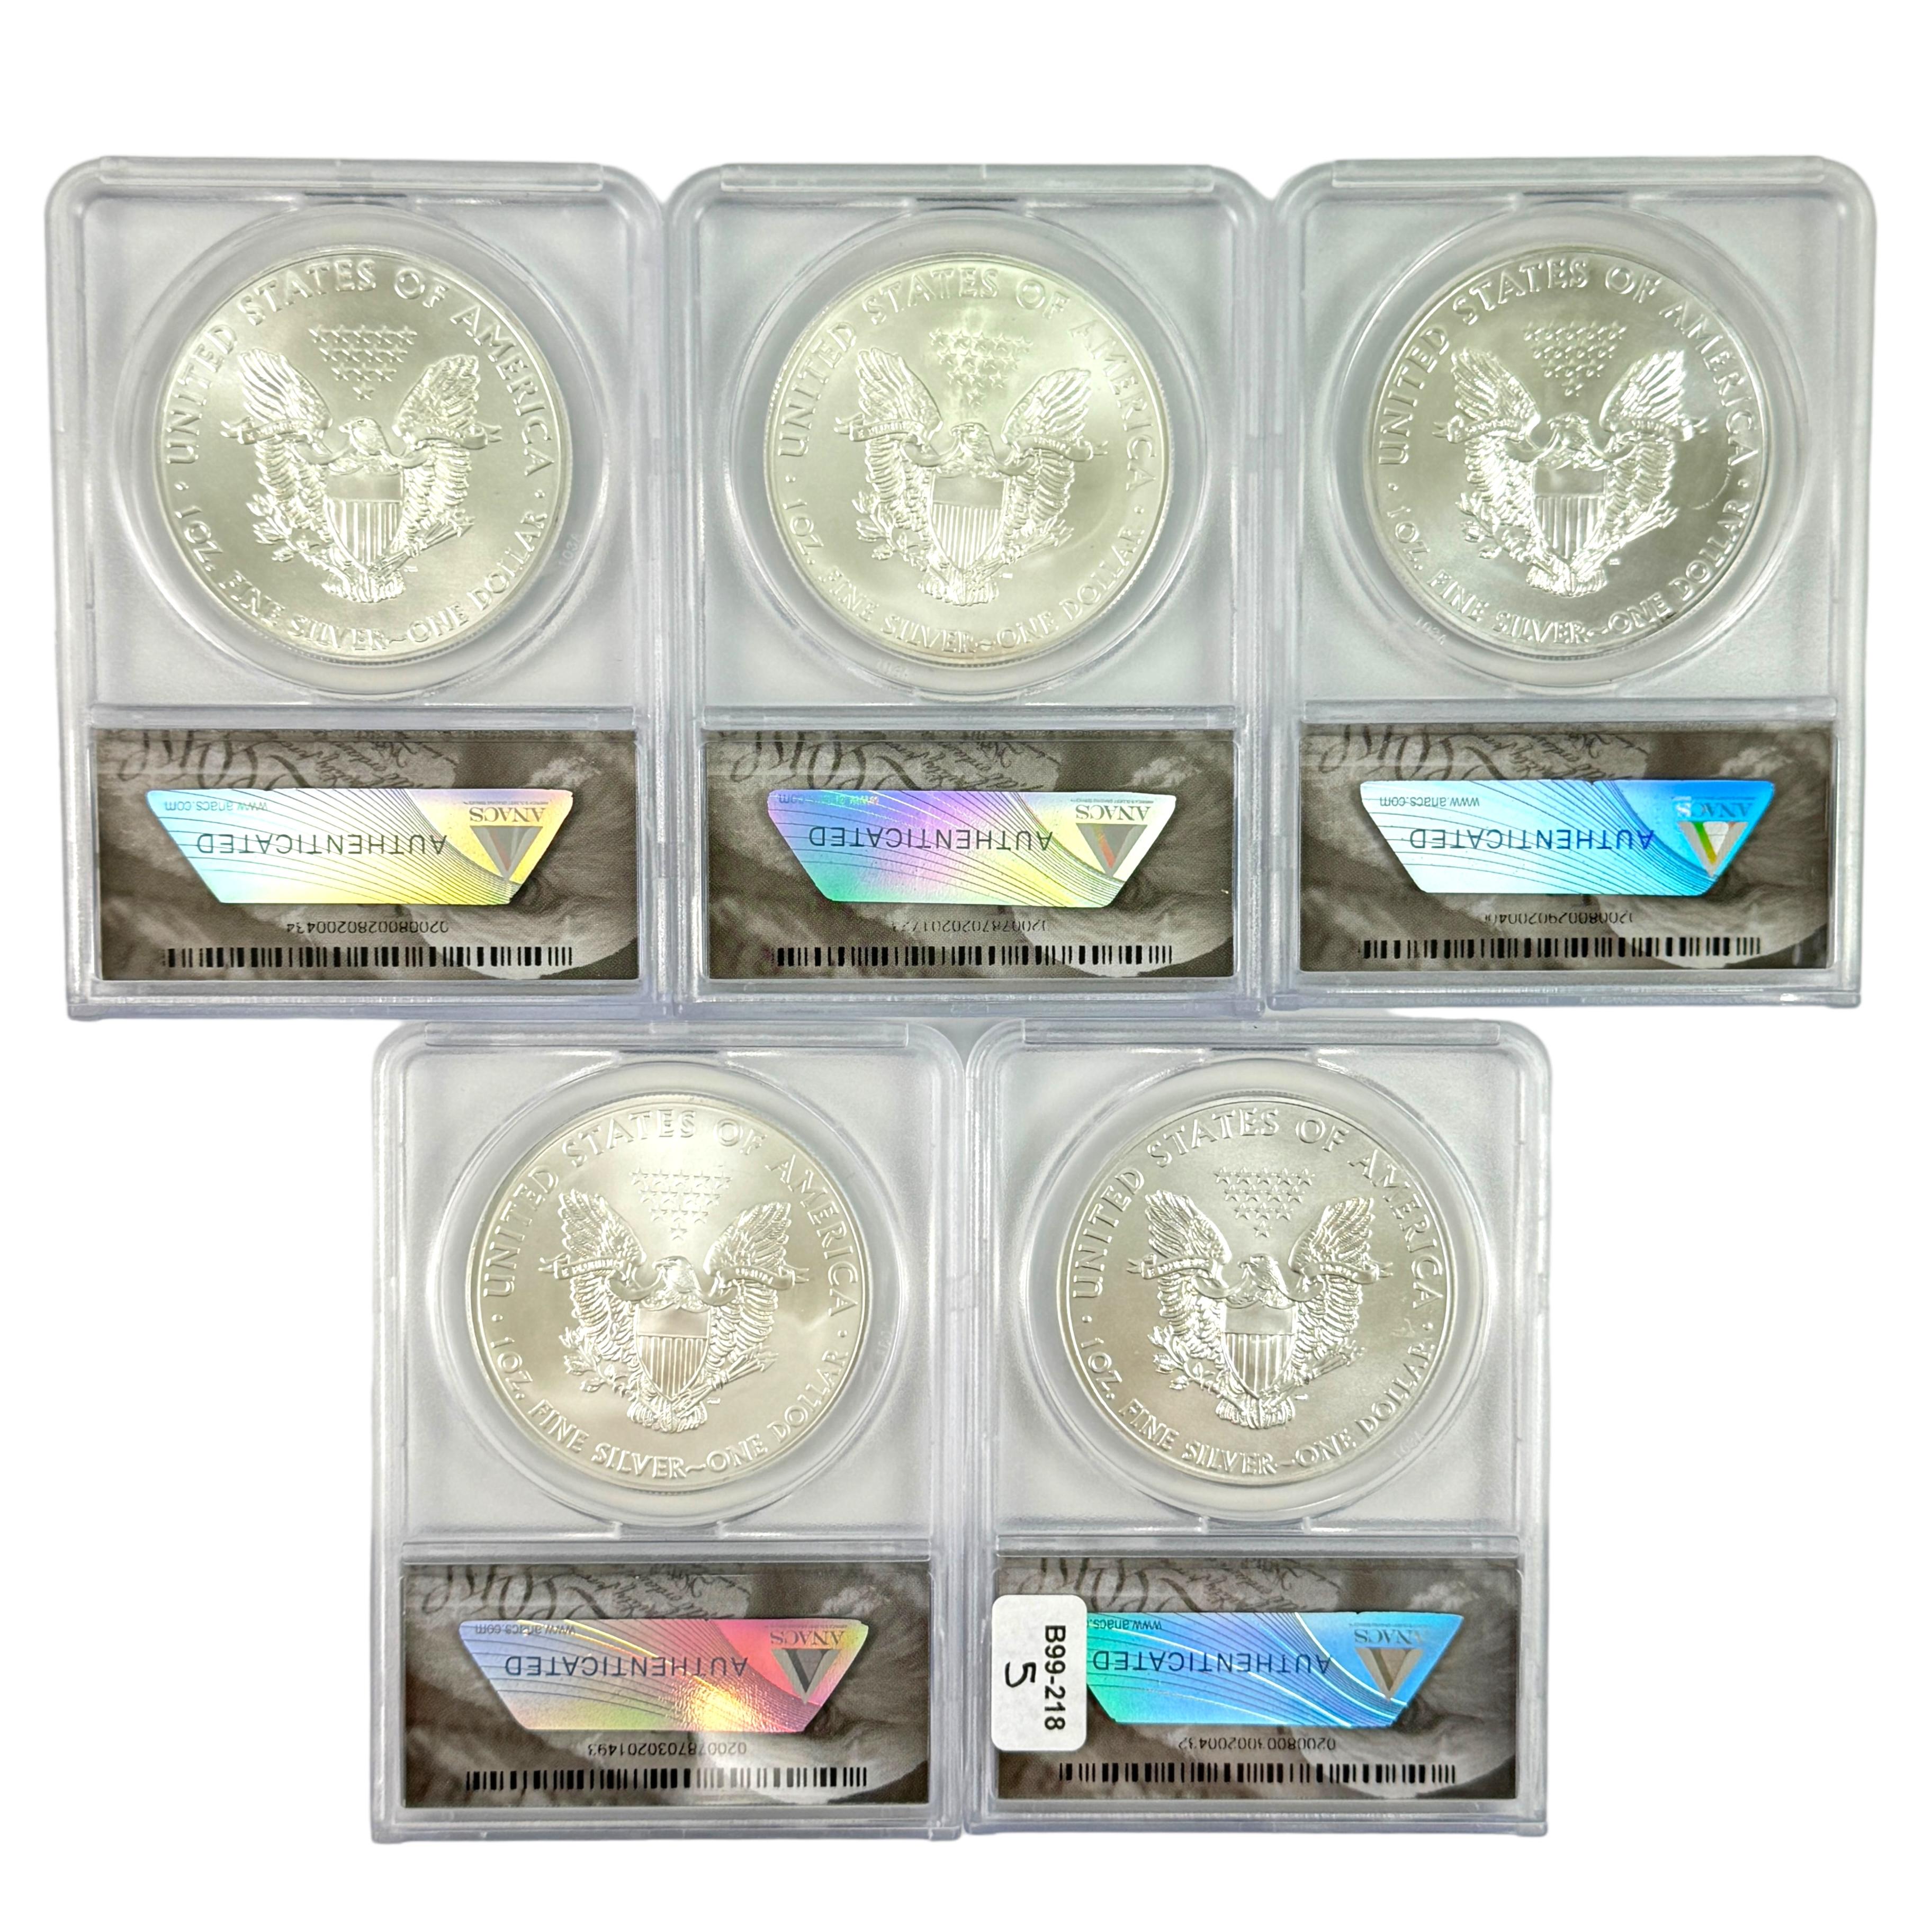 Lot of 5 different certified 2013-2015 U.S. American Eagle silver dollars including special issues